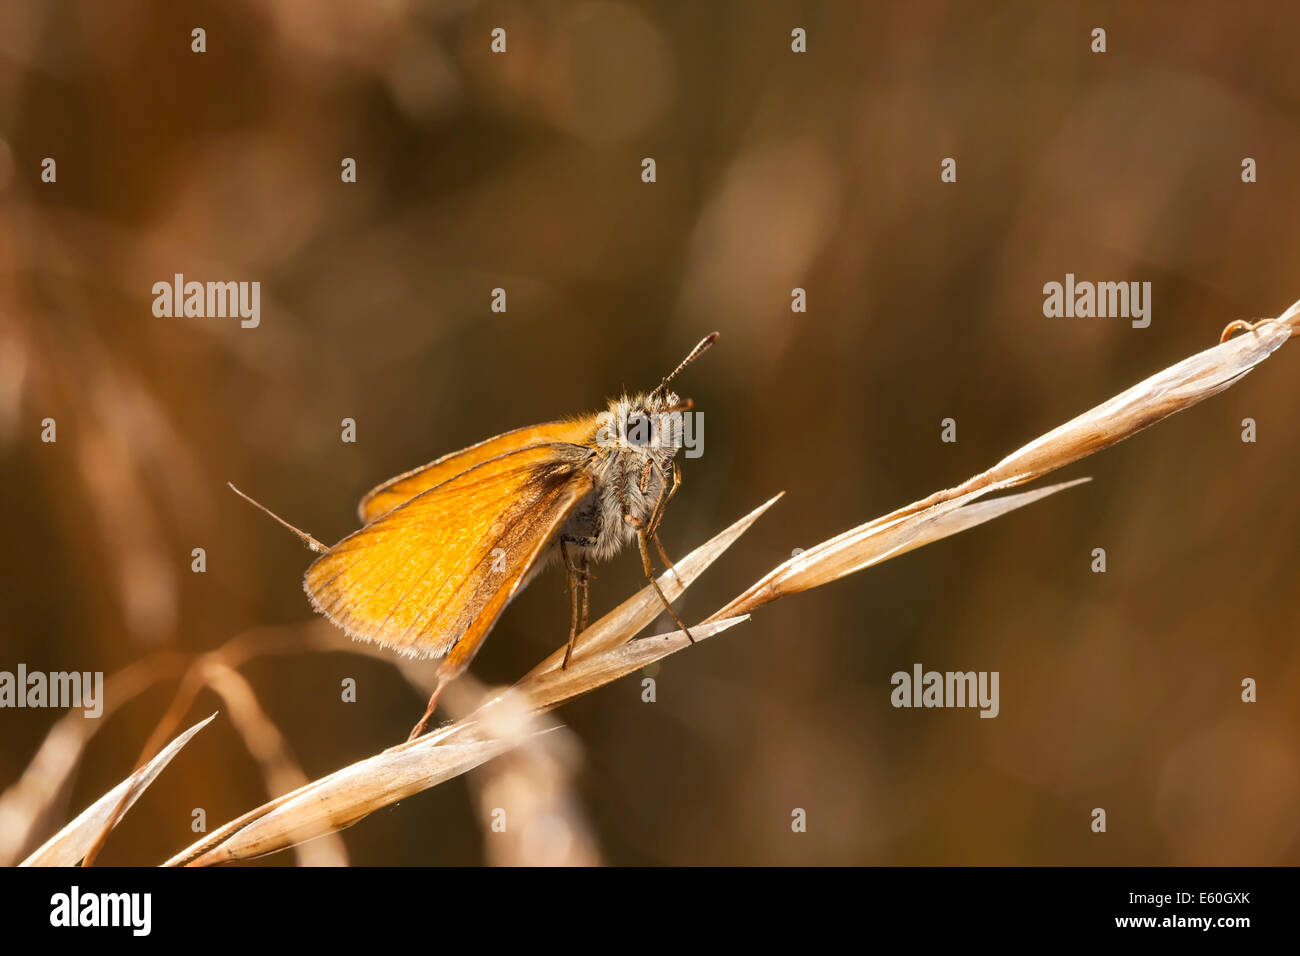 Little orange or brown butterfly sit on a plant straw Stock Photo